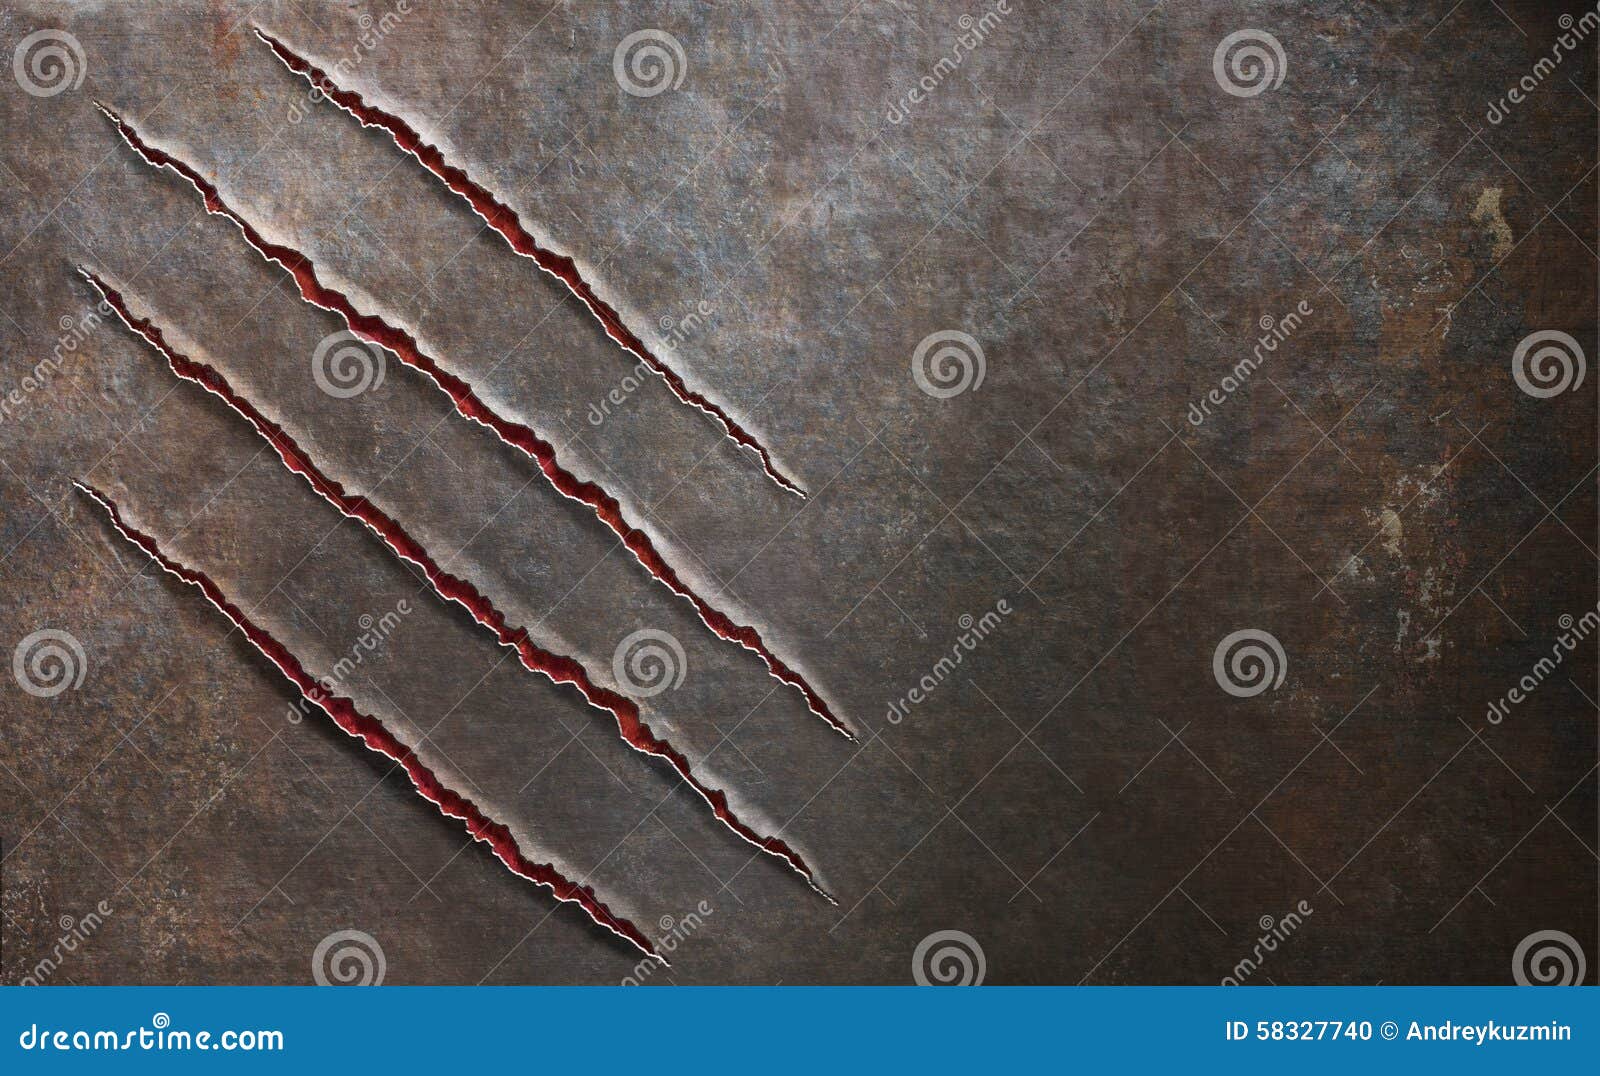 metal scratched by beast claw marks background